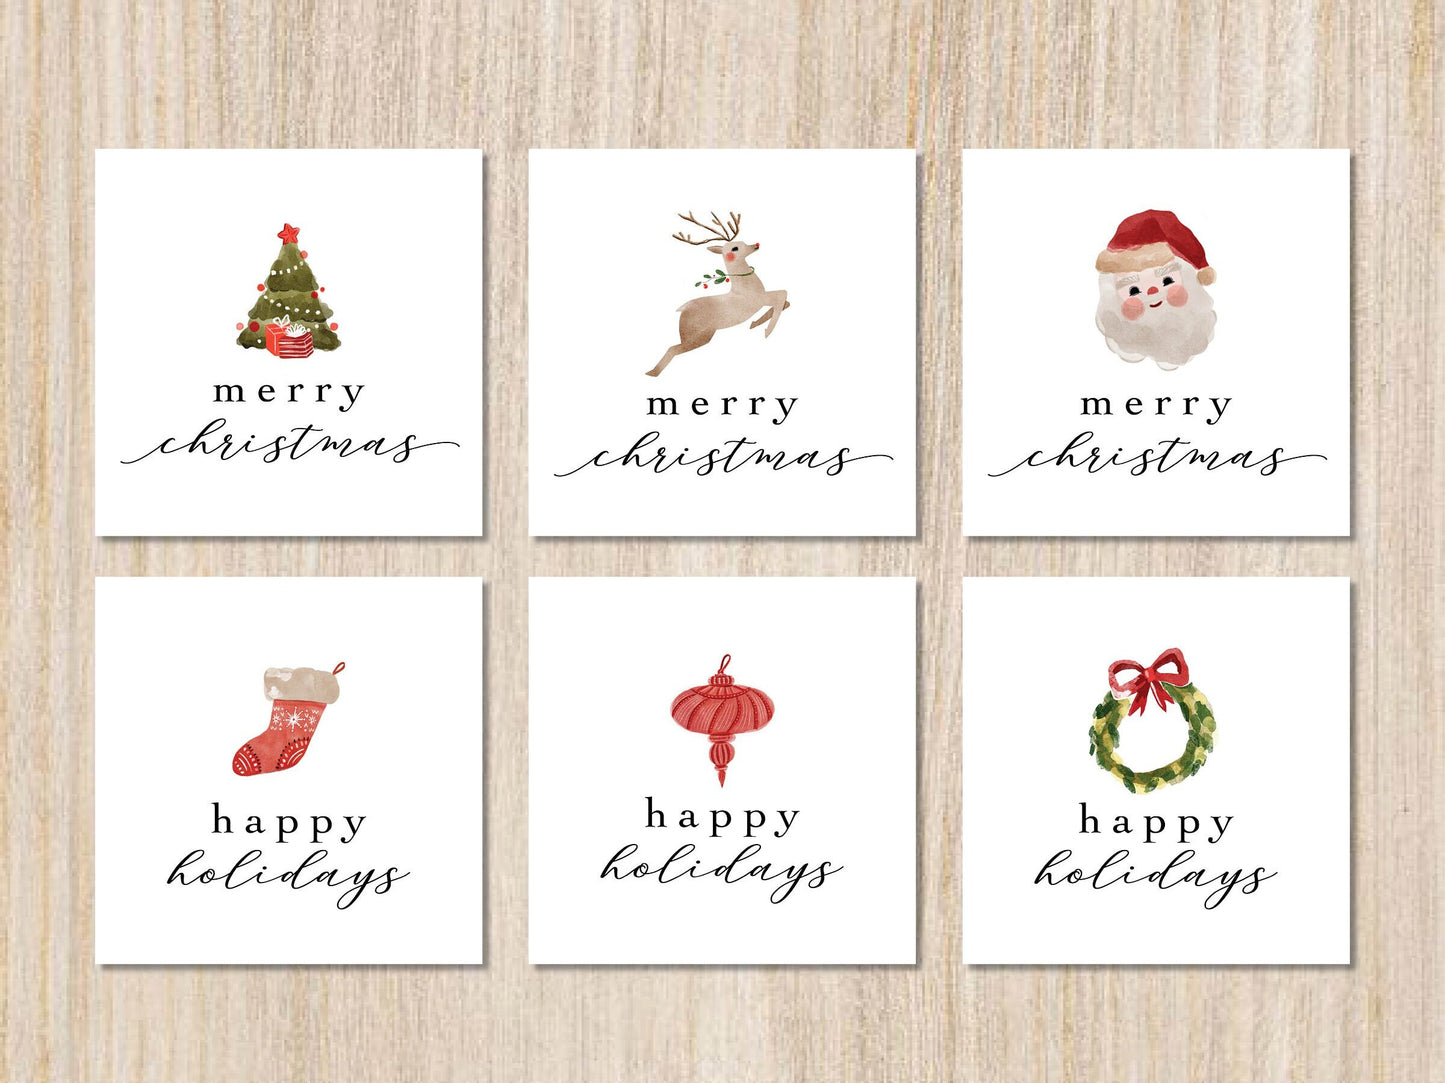 Merry Christmas Sticker Pack, Watercolor Christmas Sticker, Merry Christmas Labels, Holiday Gift Tags, Holiday Gift Sticker, Xmas Stickers